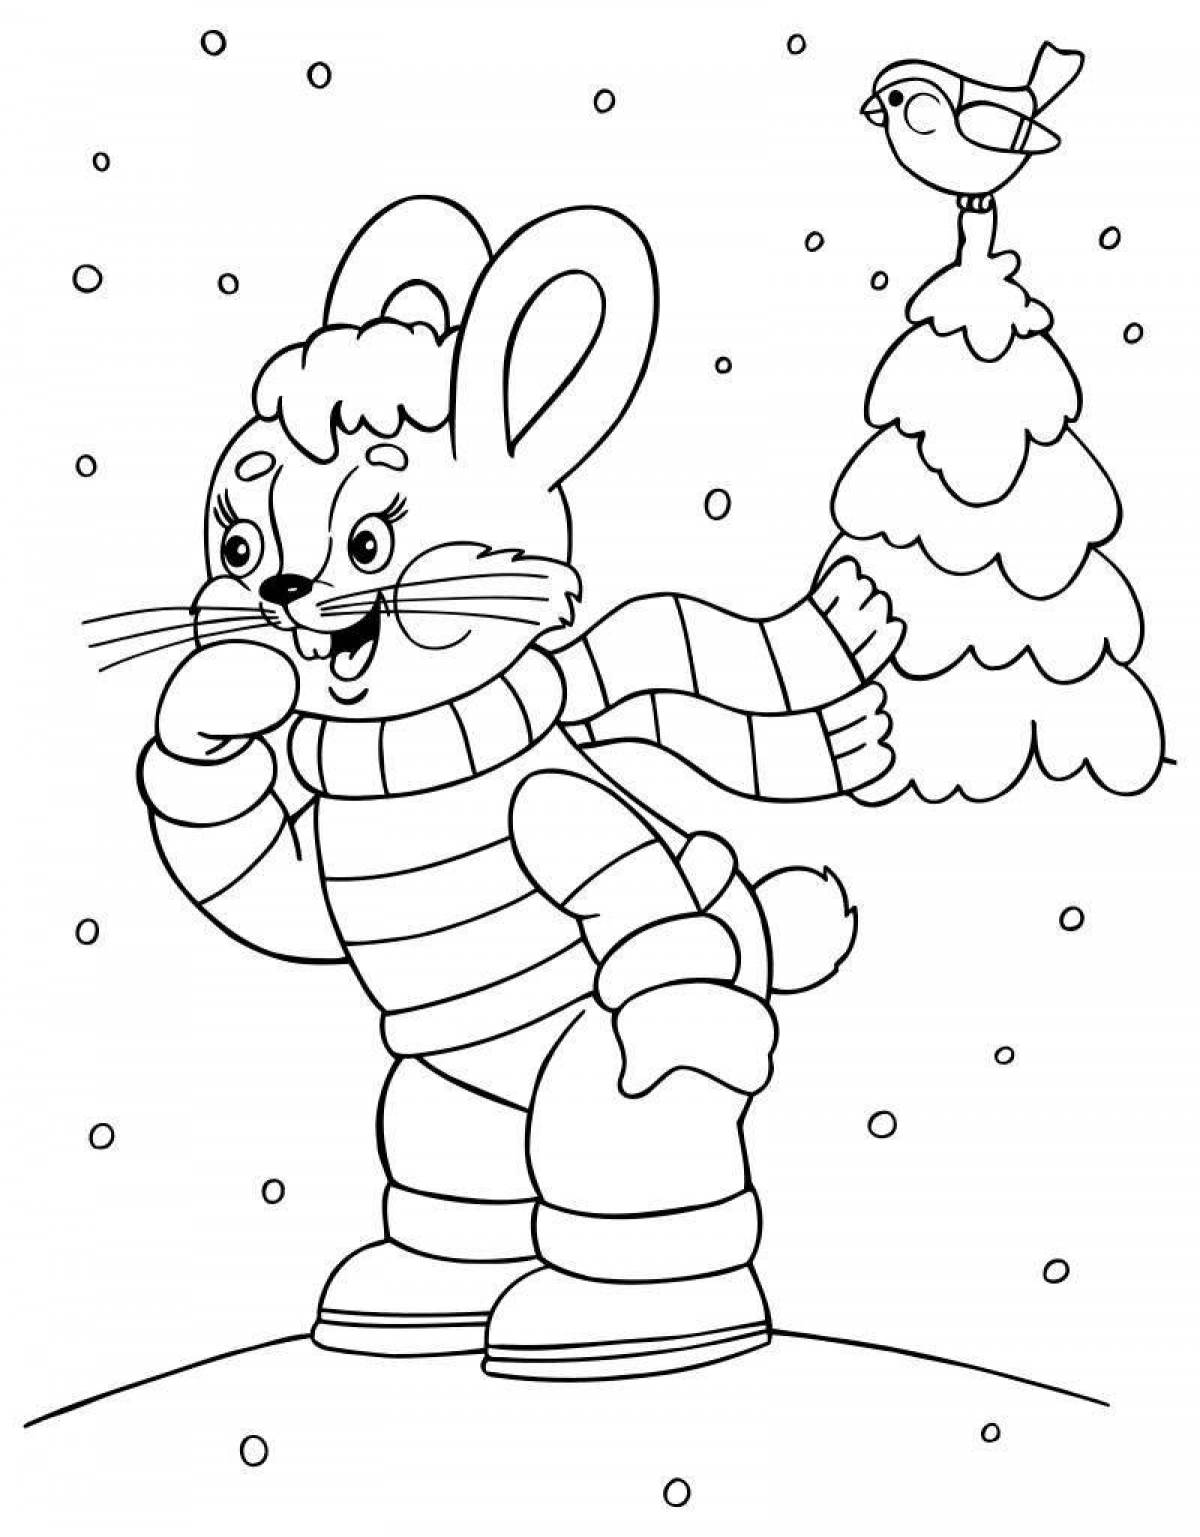 Exciting bunny Christmas coloring book